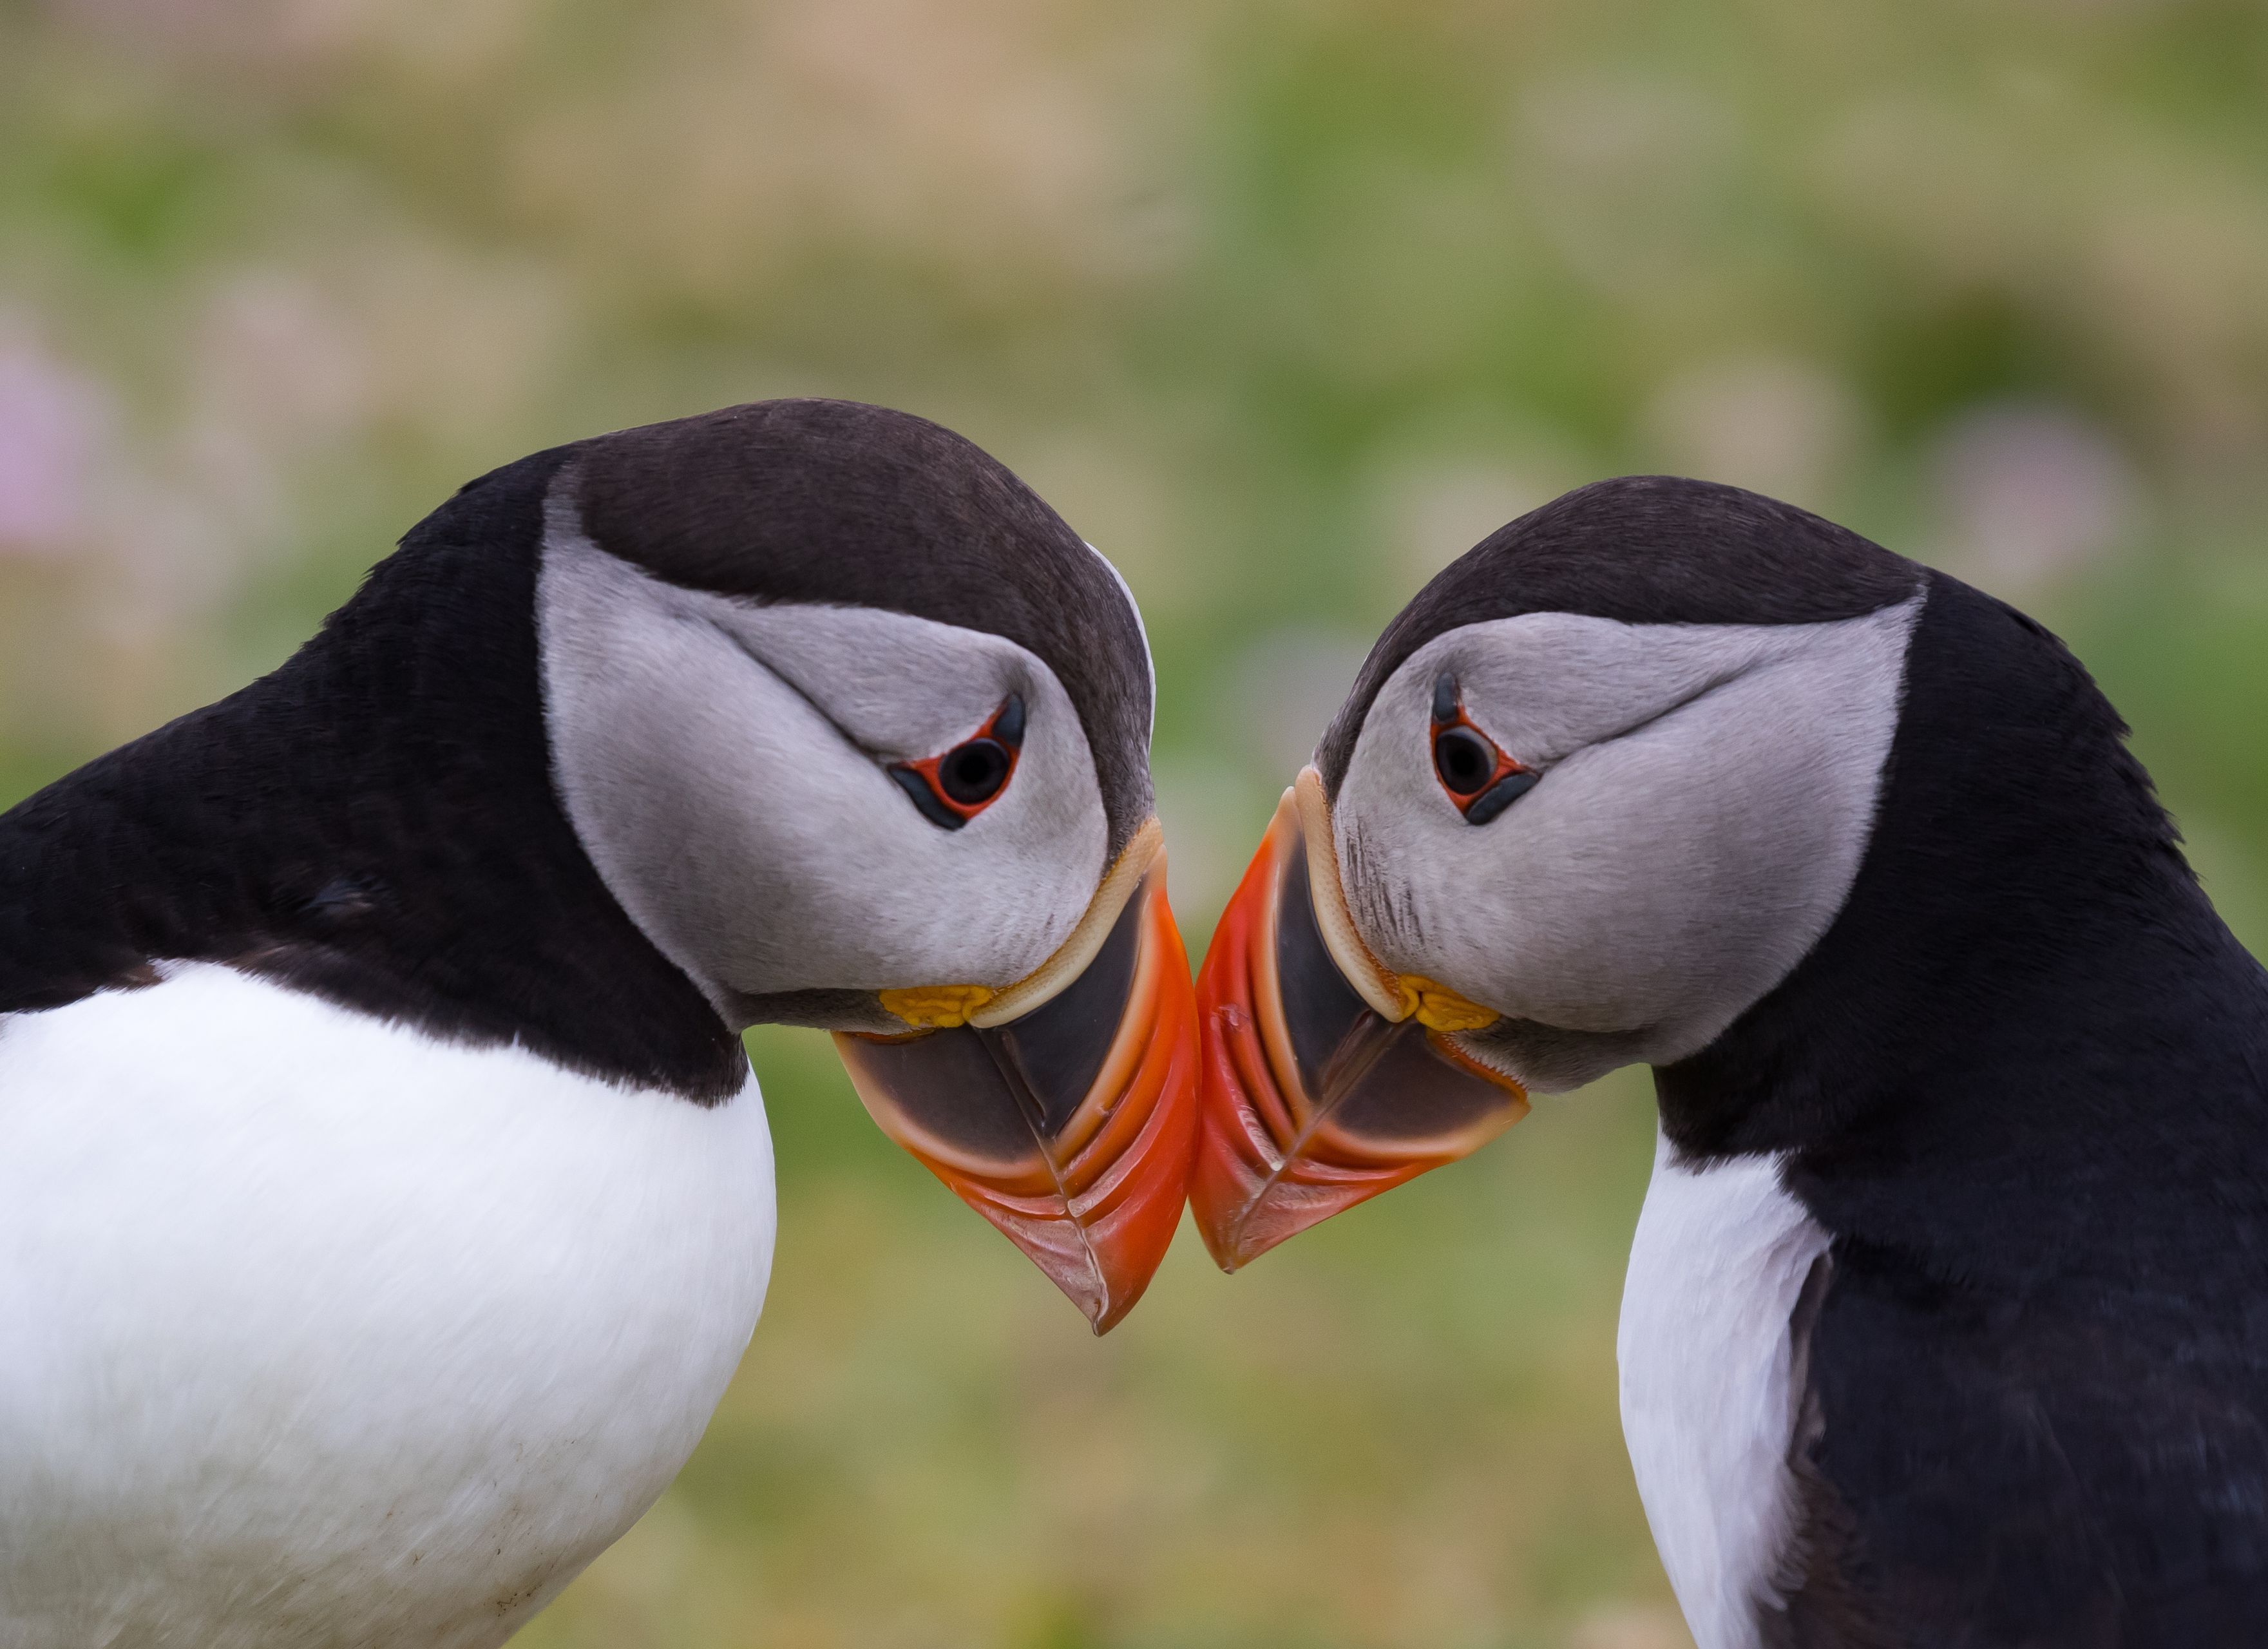 Puffins in iceland during October